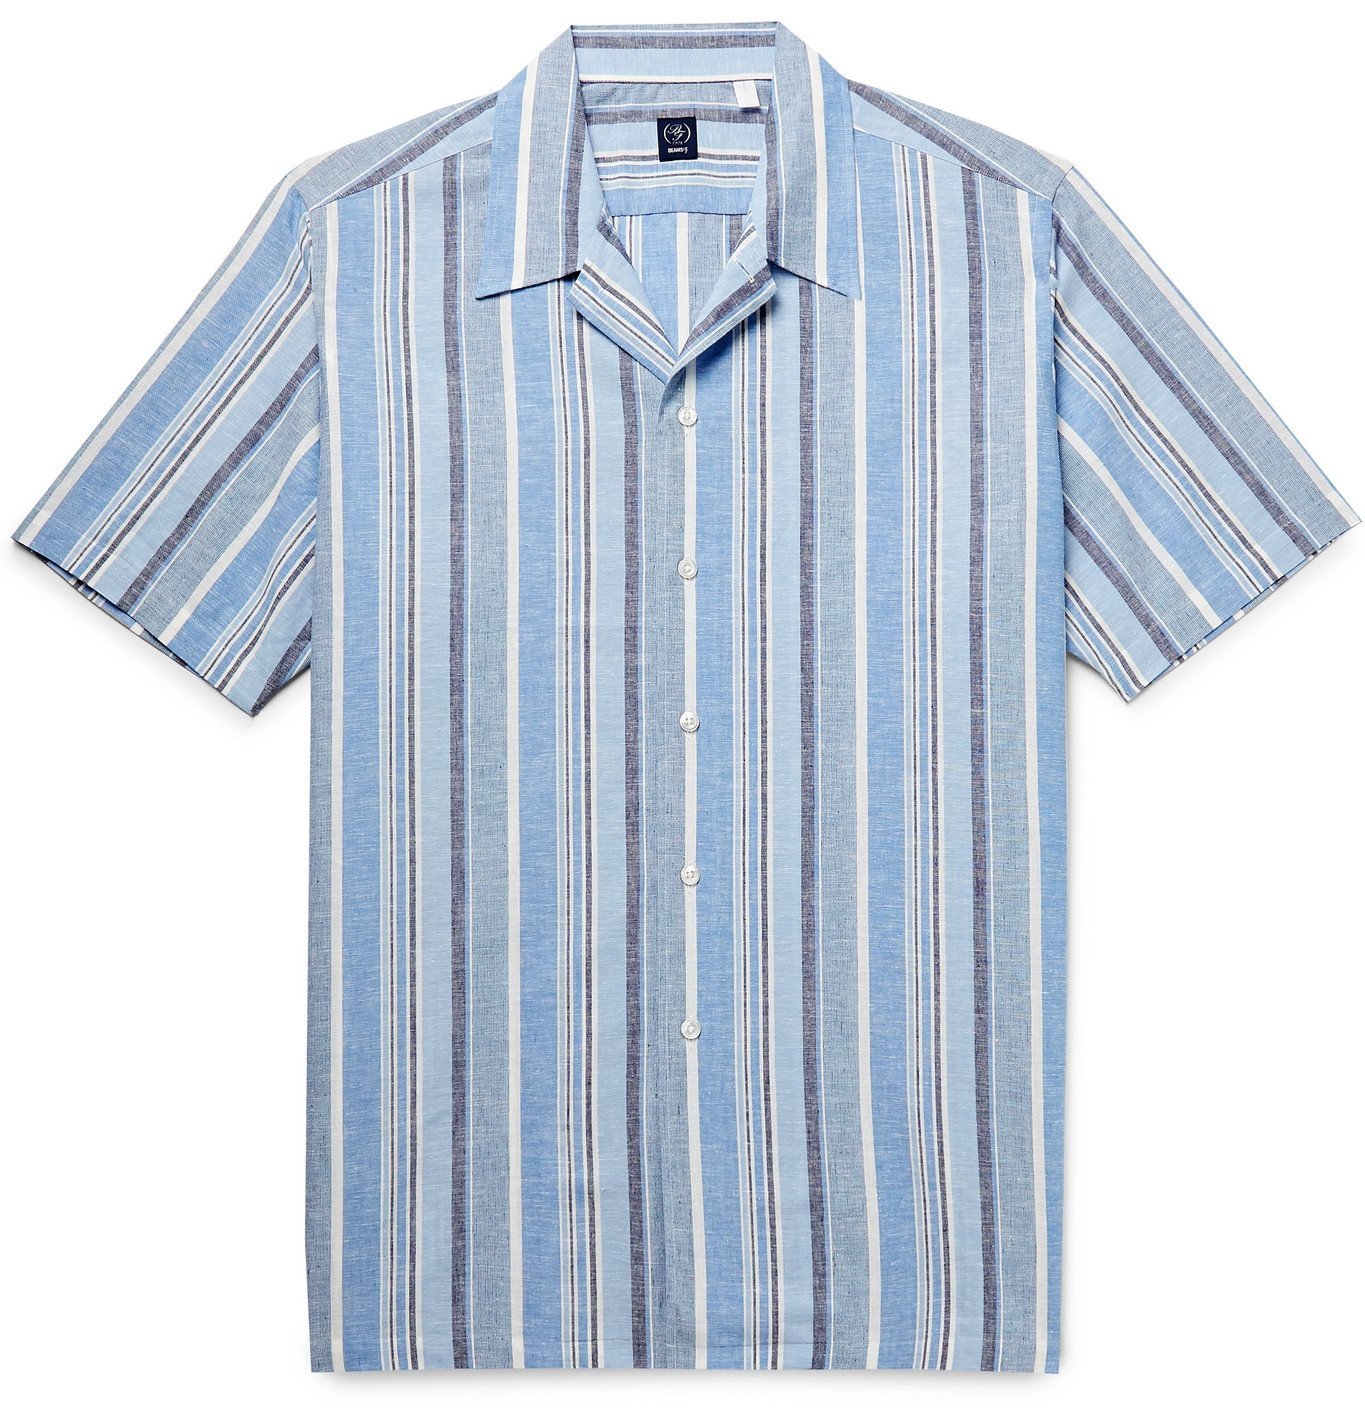 Beams F - Camp-Collar Striped Cotton and Linen-Blend Shirt - Blue Beams F